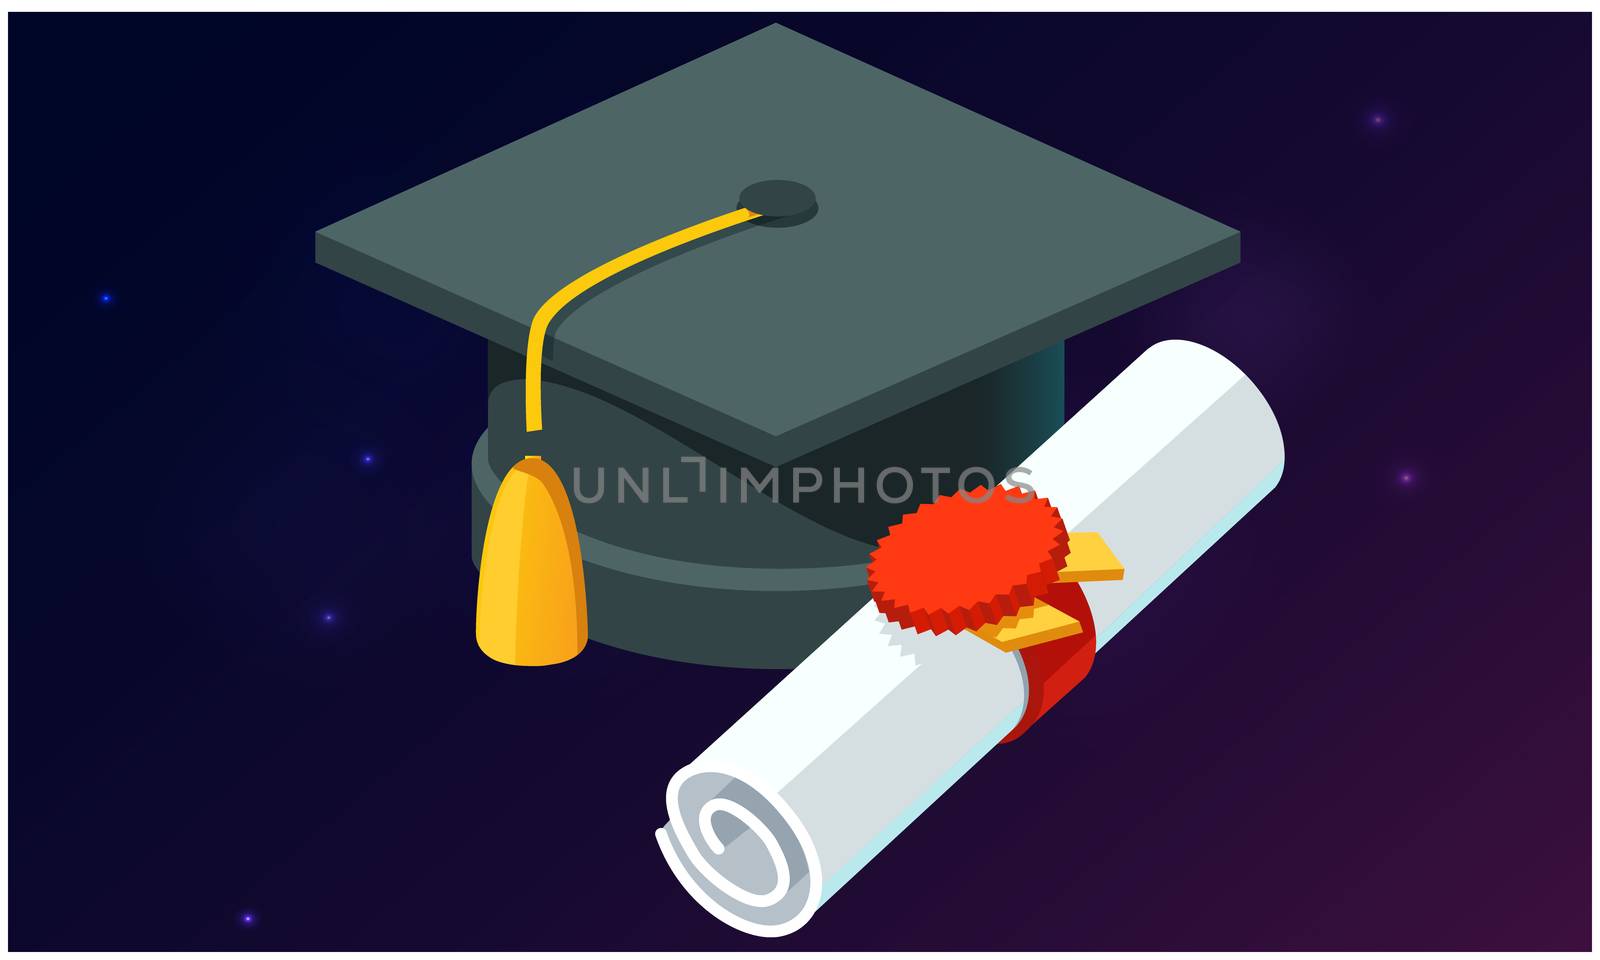 mock up illustration of graduation cap and certificate on abstract background by aanavcreationsplus